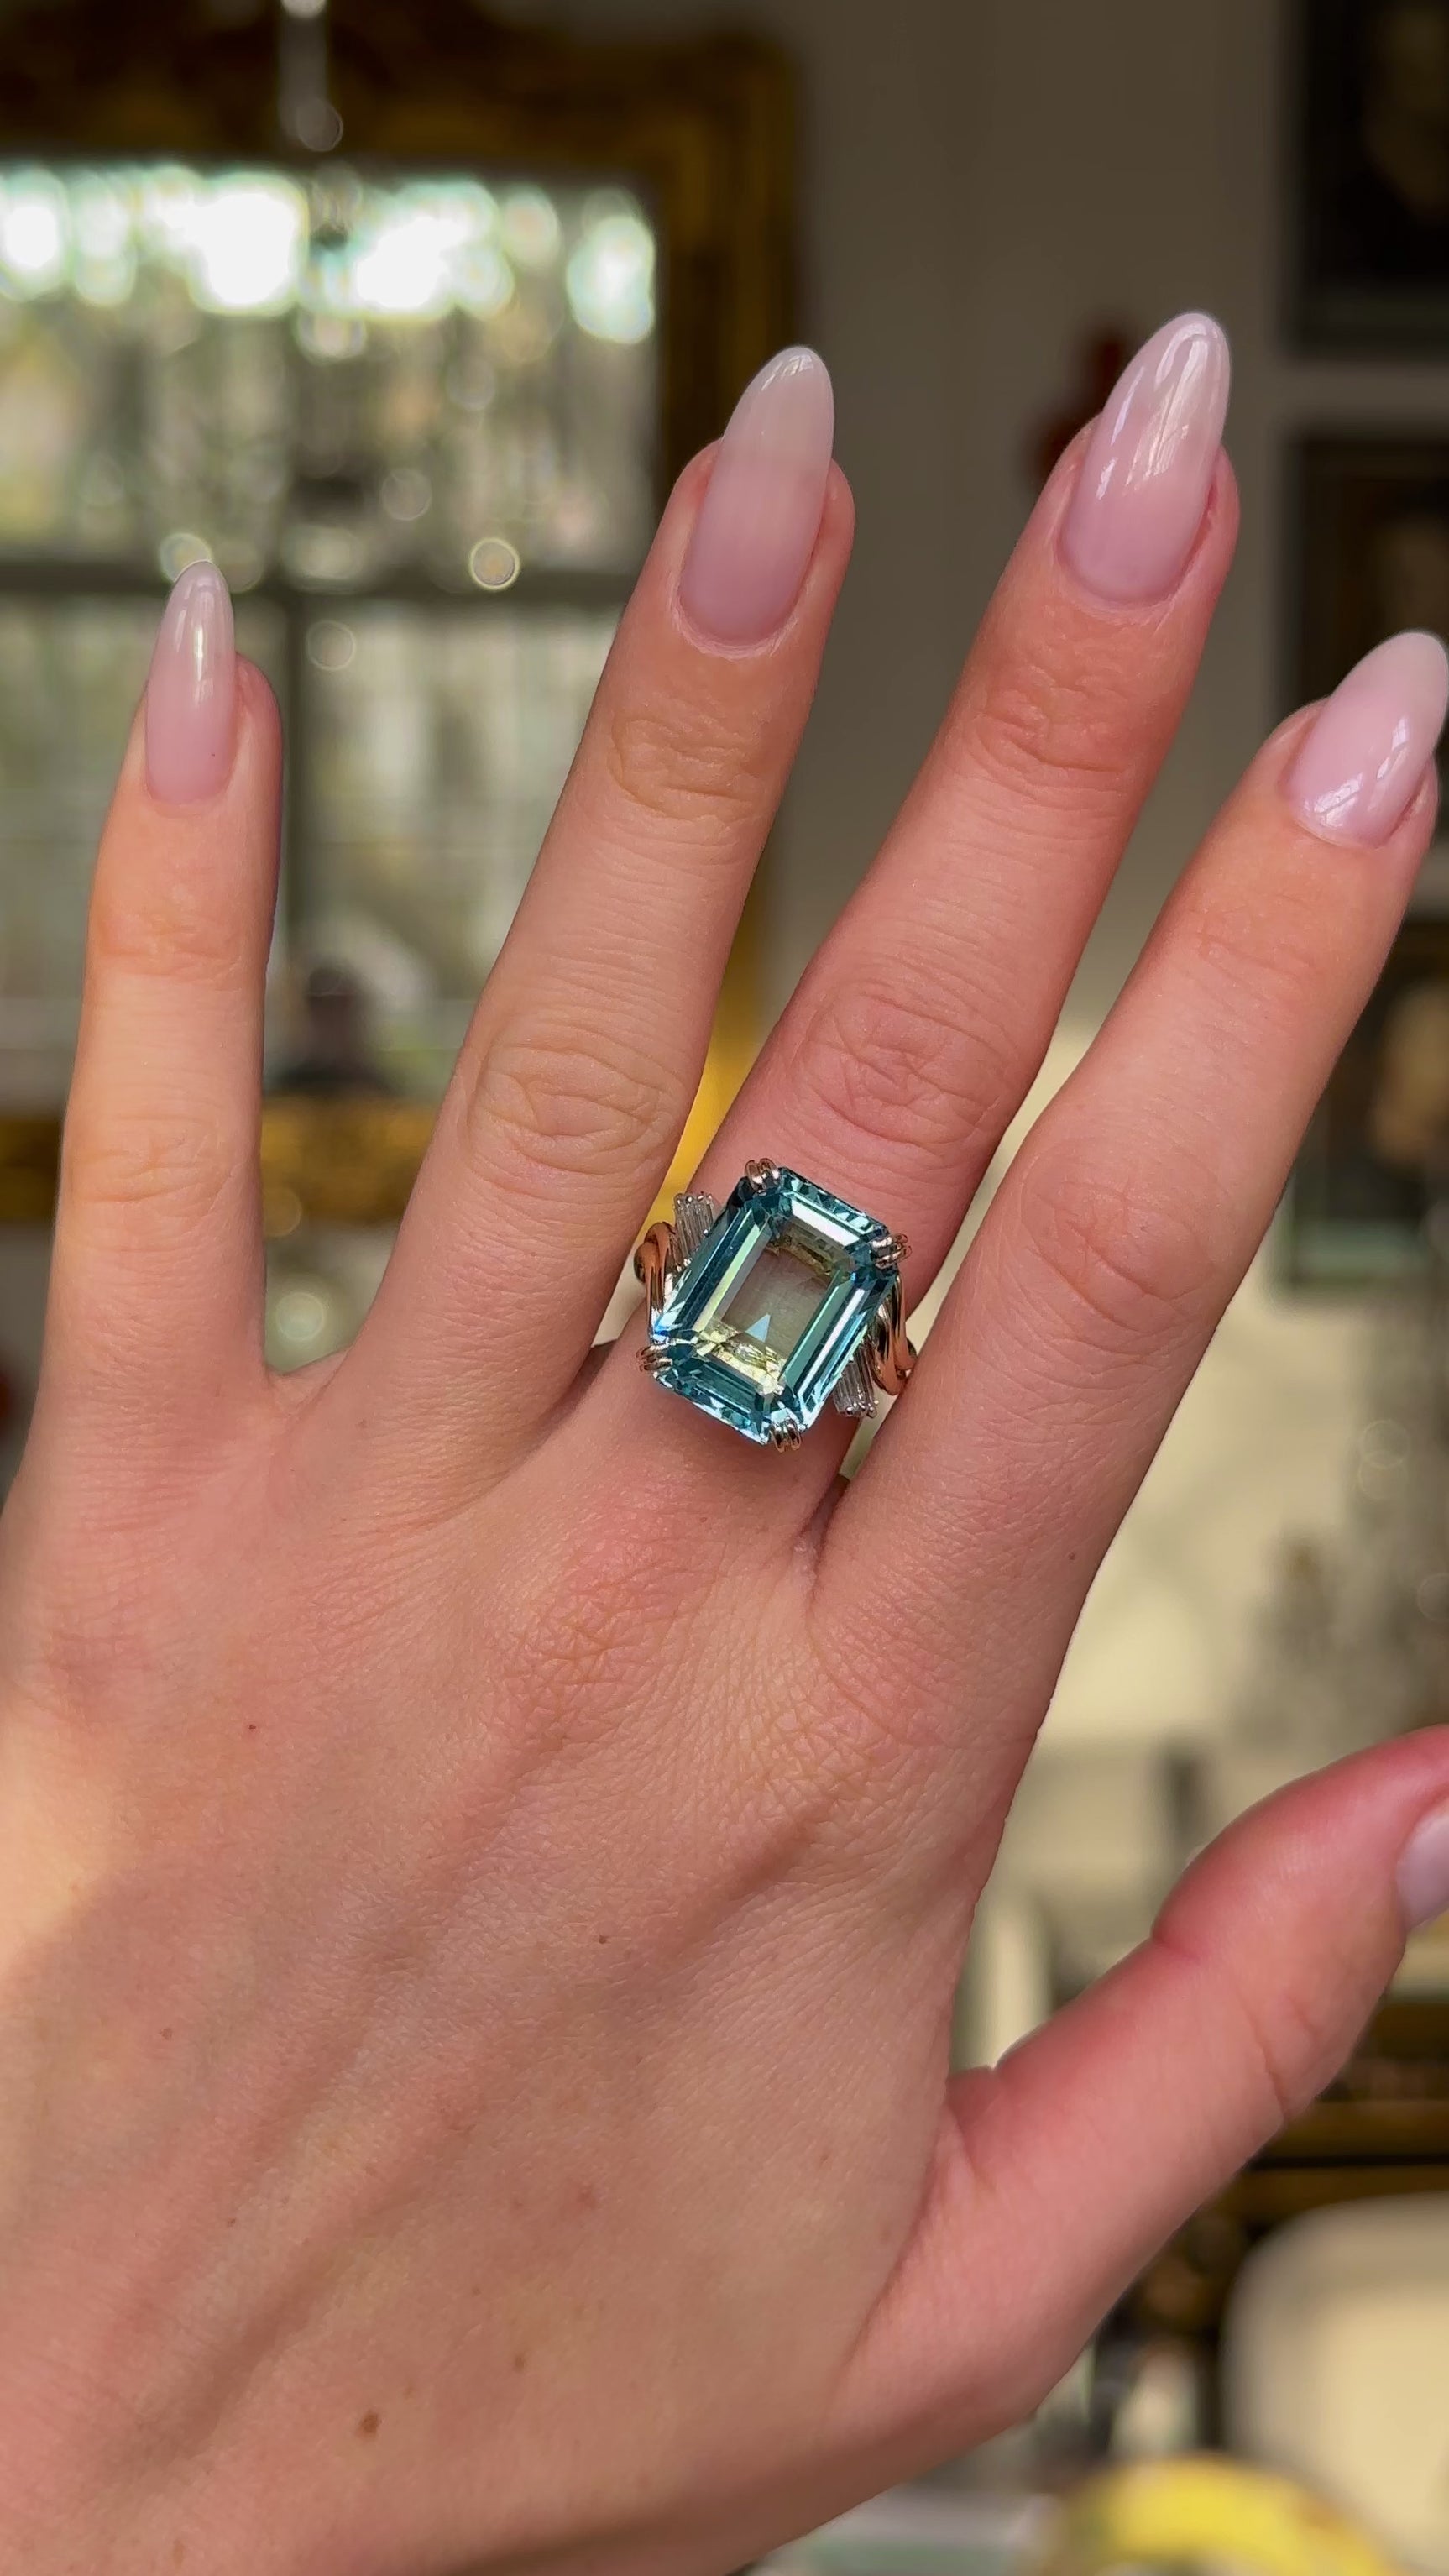 vintage aquamarine and diamond ring worn on hand and moved around to give perspective.